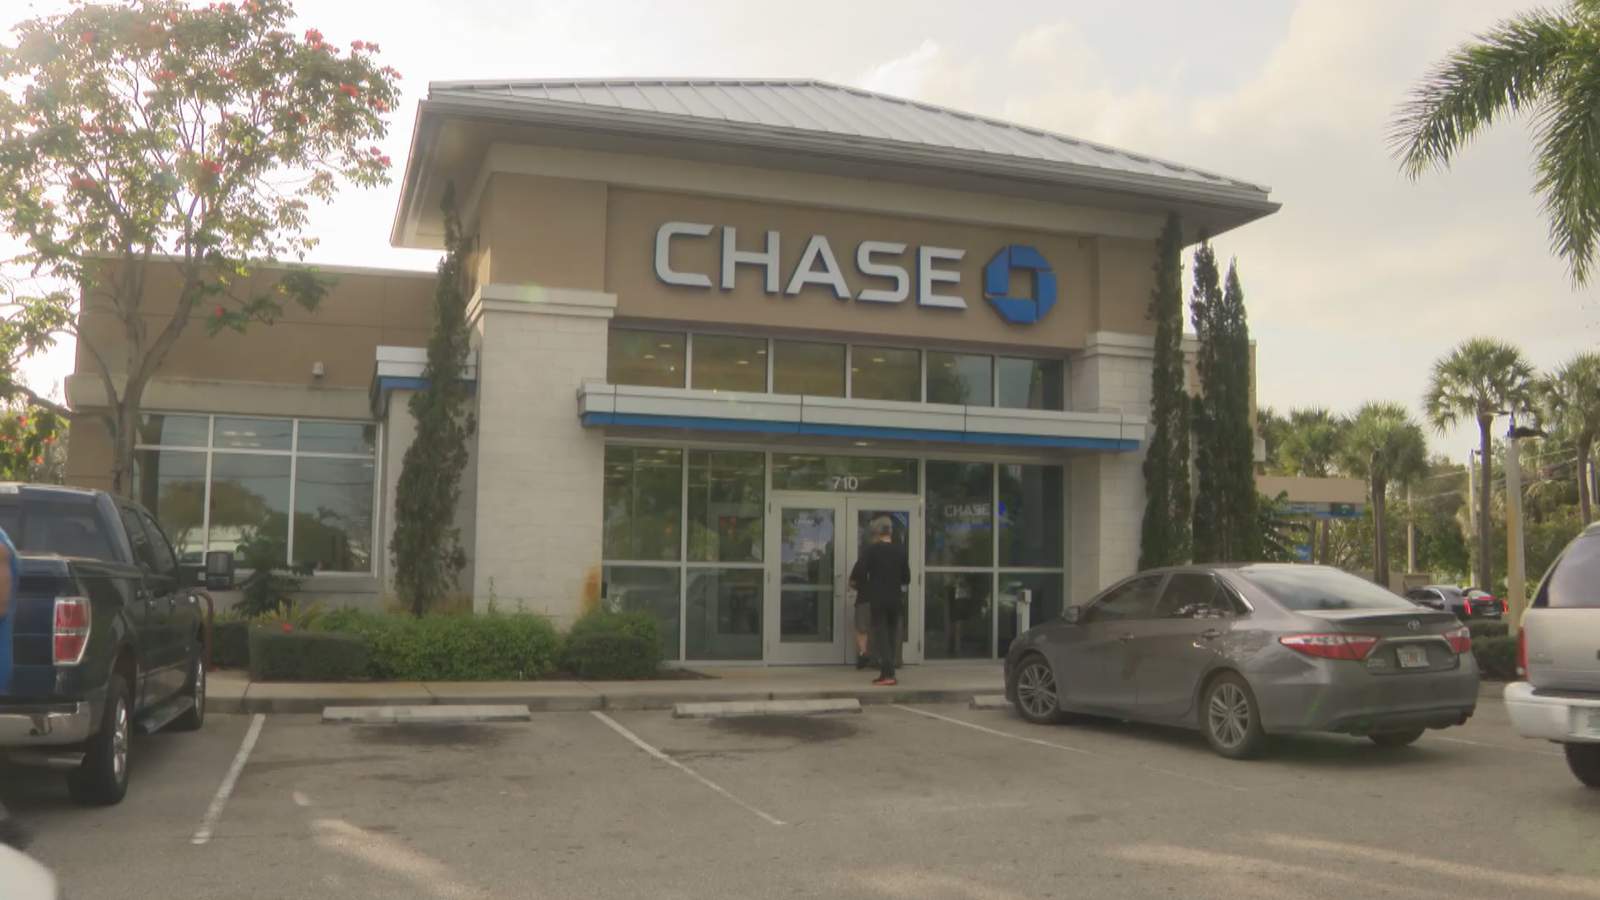 2 men sought in connection with shooting outside Chase bank in Pembroke Pines